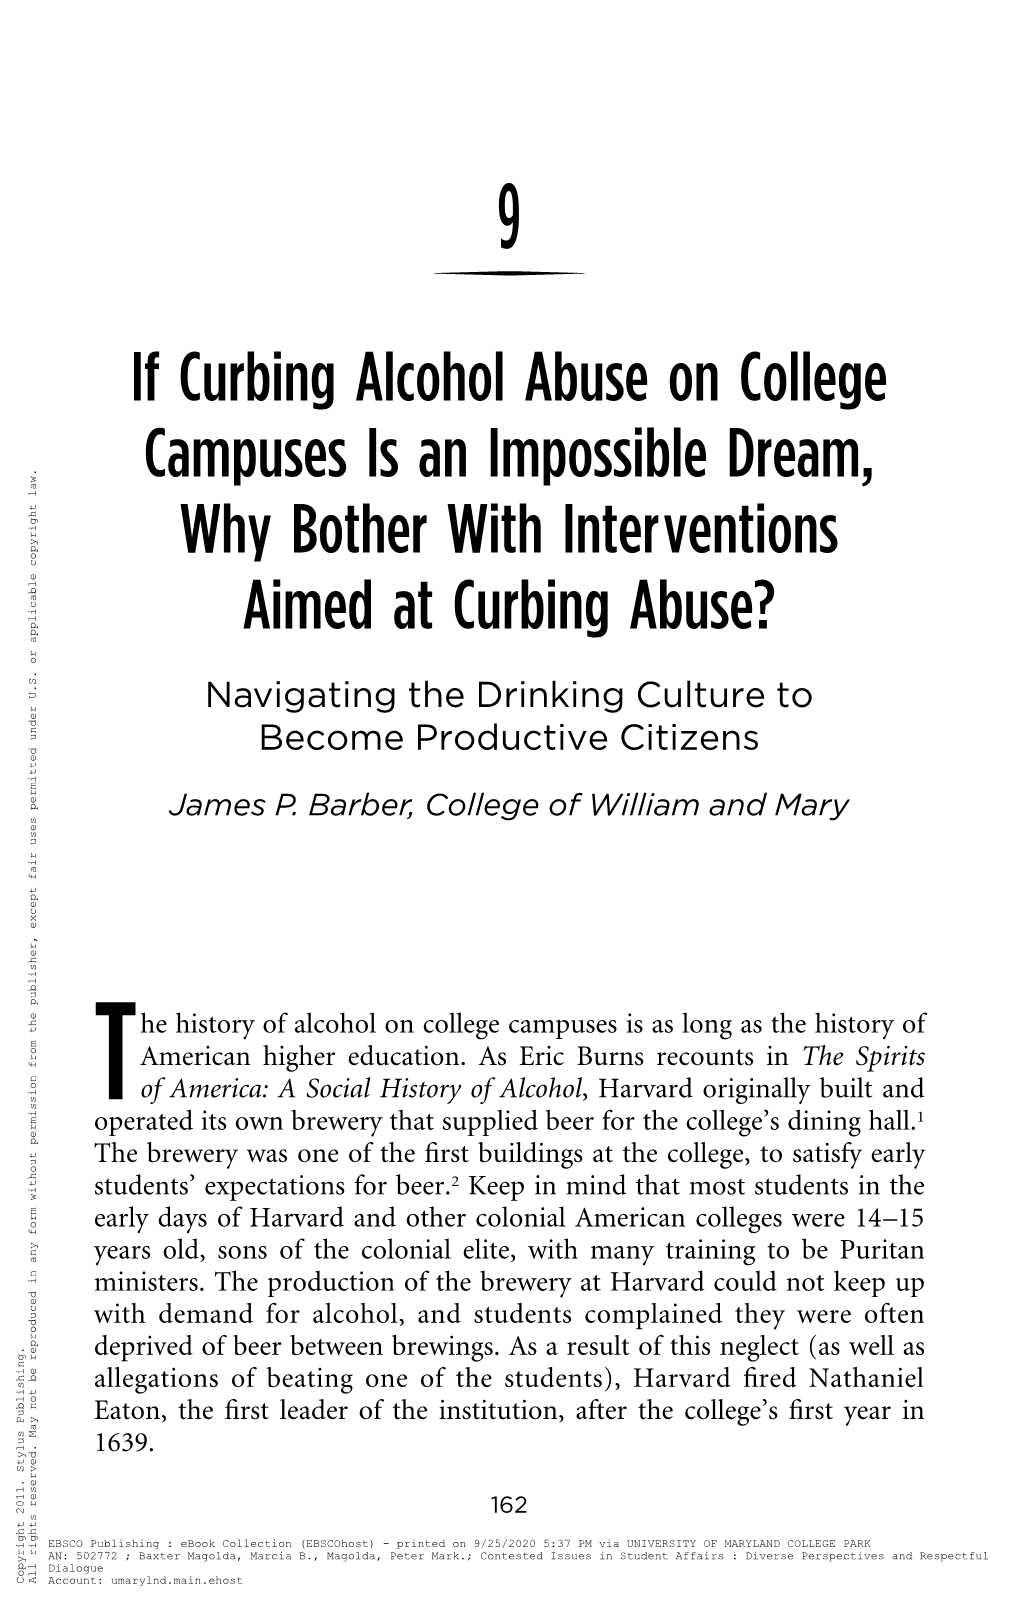 If Curbing Alcohol Abuse on College Campuses Is an Impossible Dream, Why Bother with Interventions Aimed at Curbing Abuse?